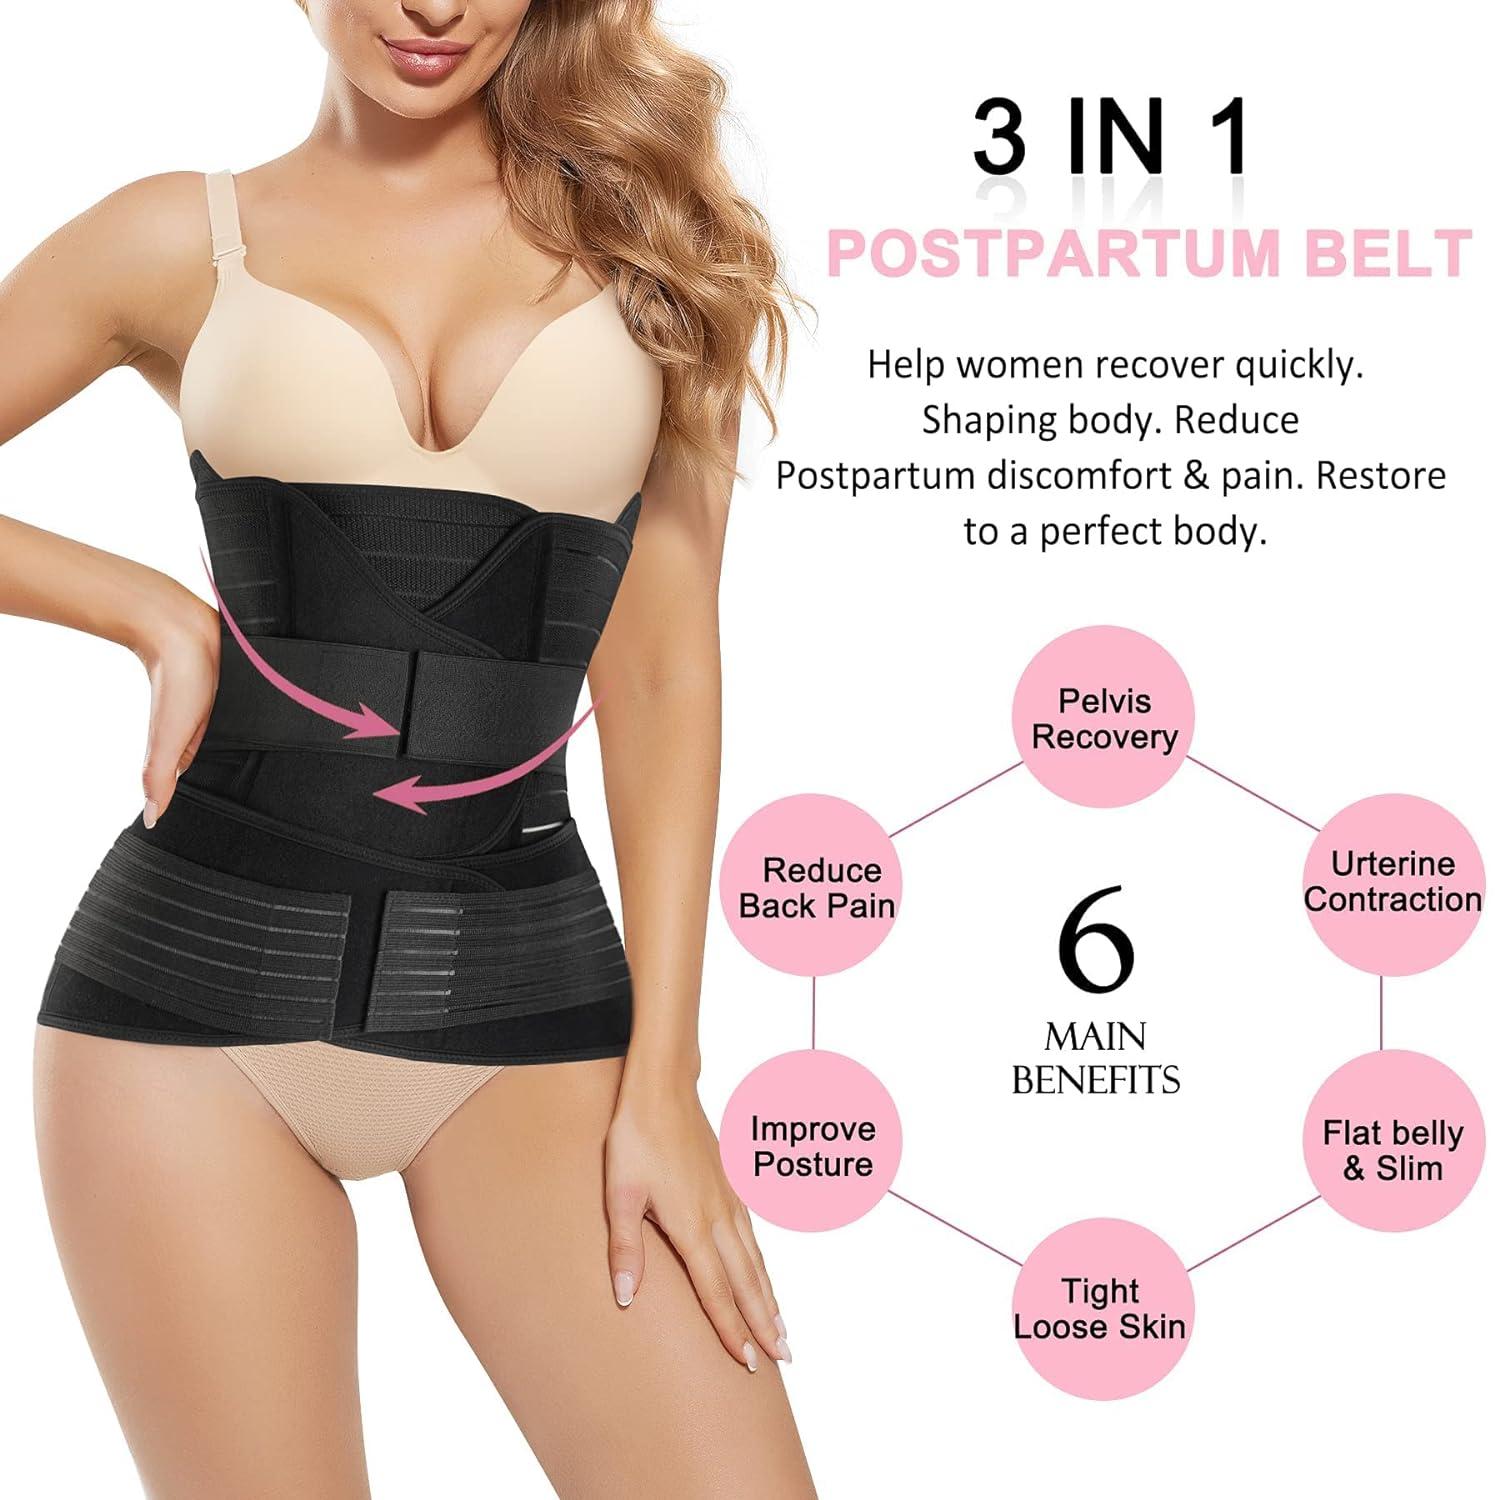 Best Tummy Reducing Belt After C-Section - Ease Backache & Promote